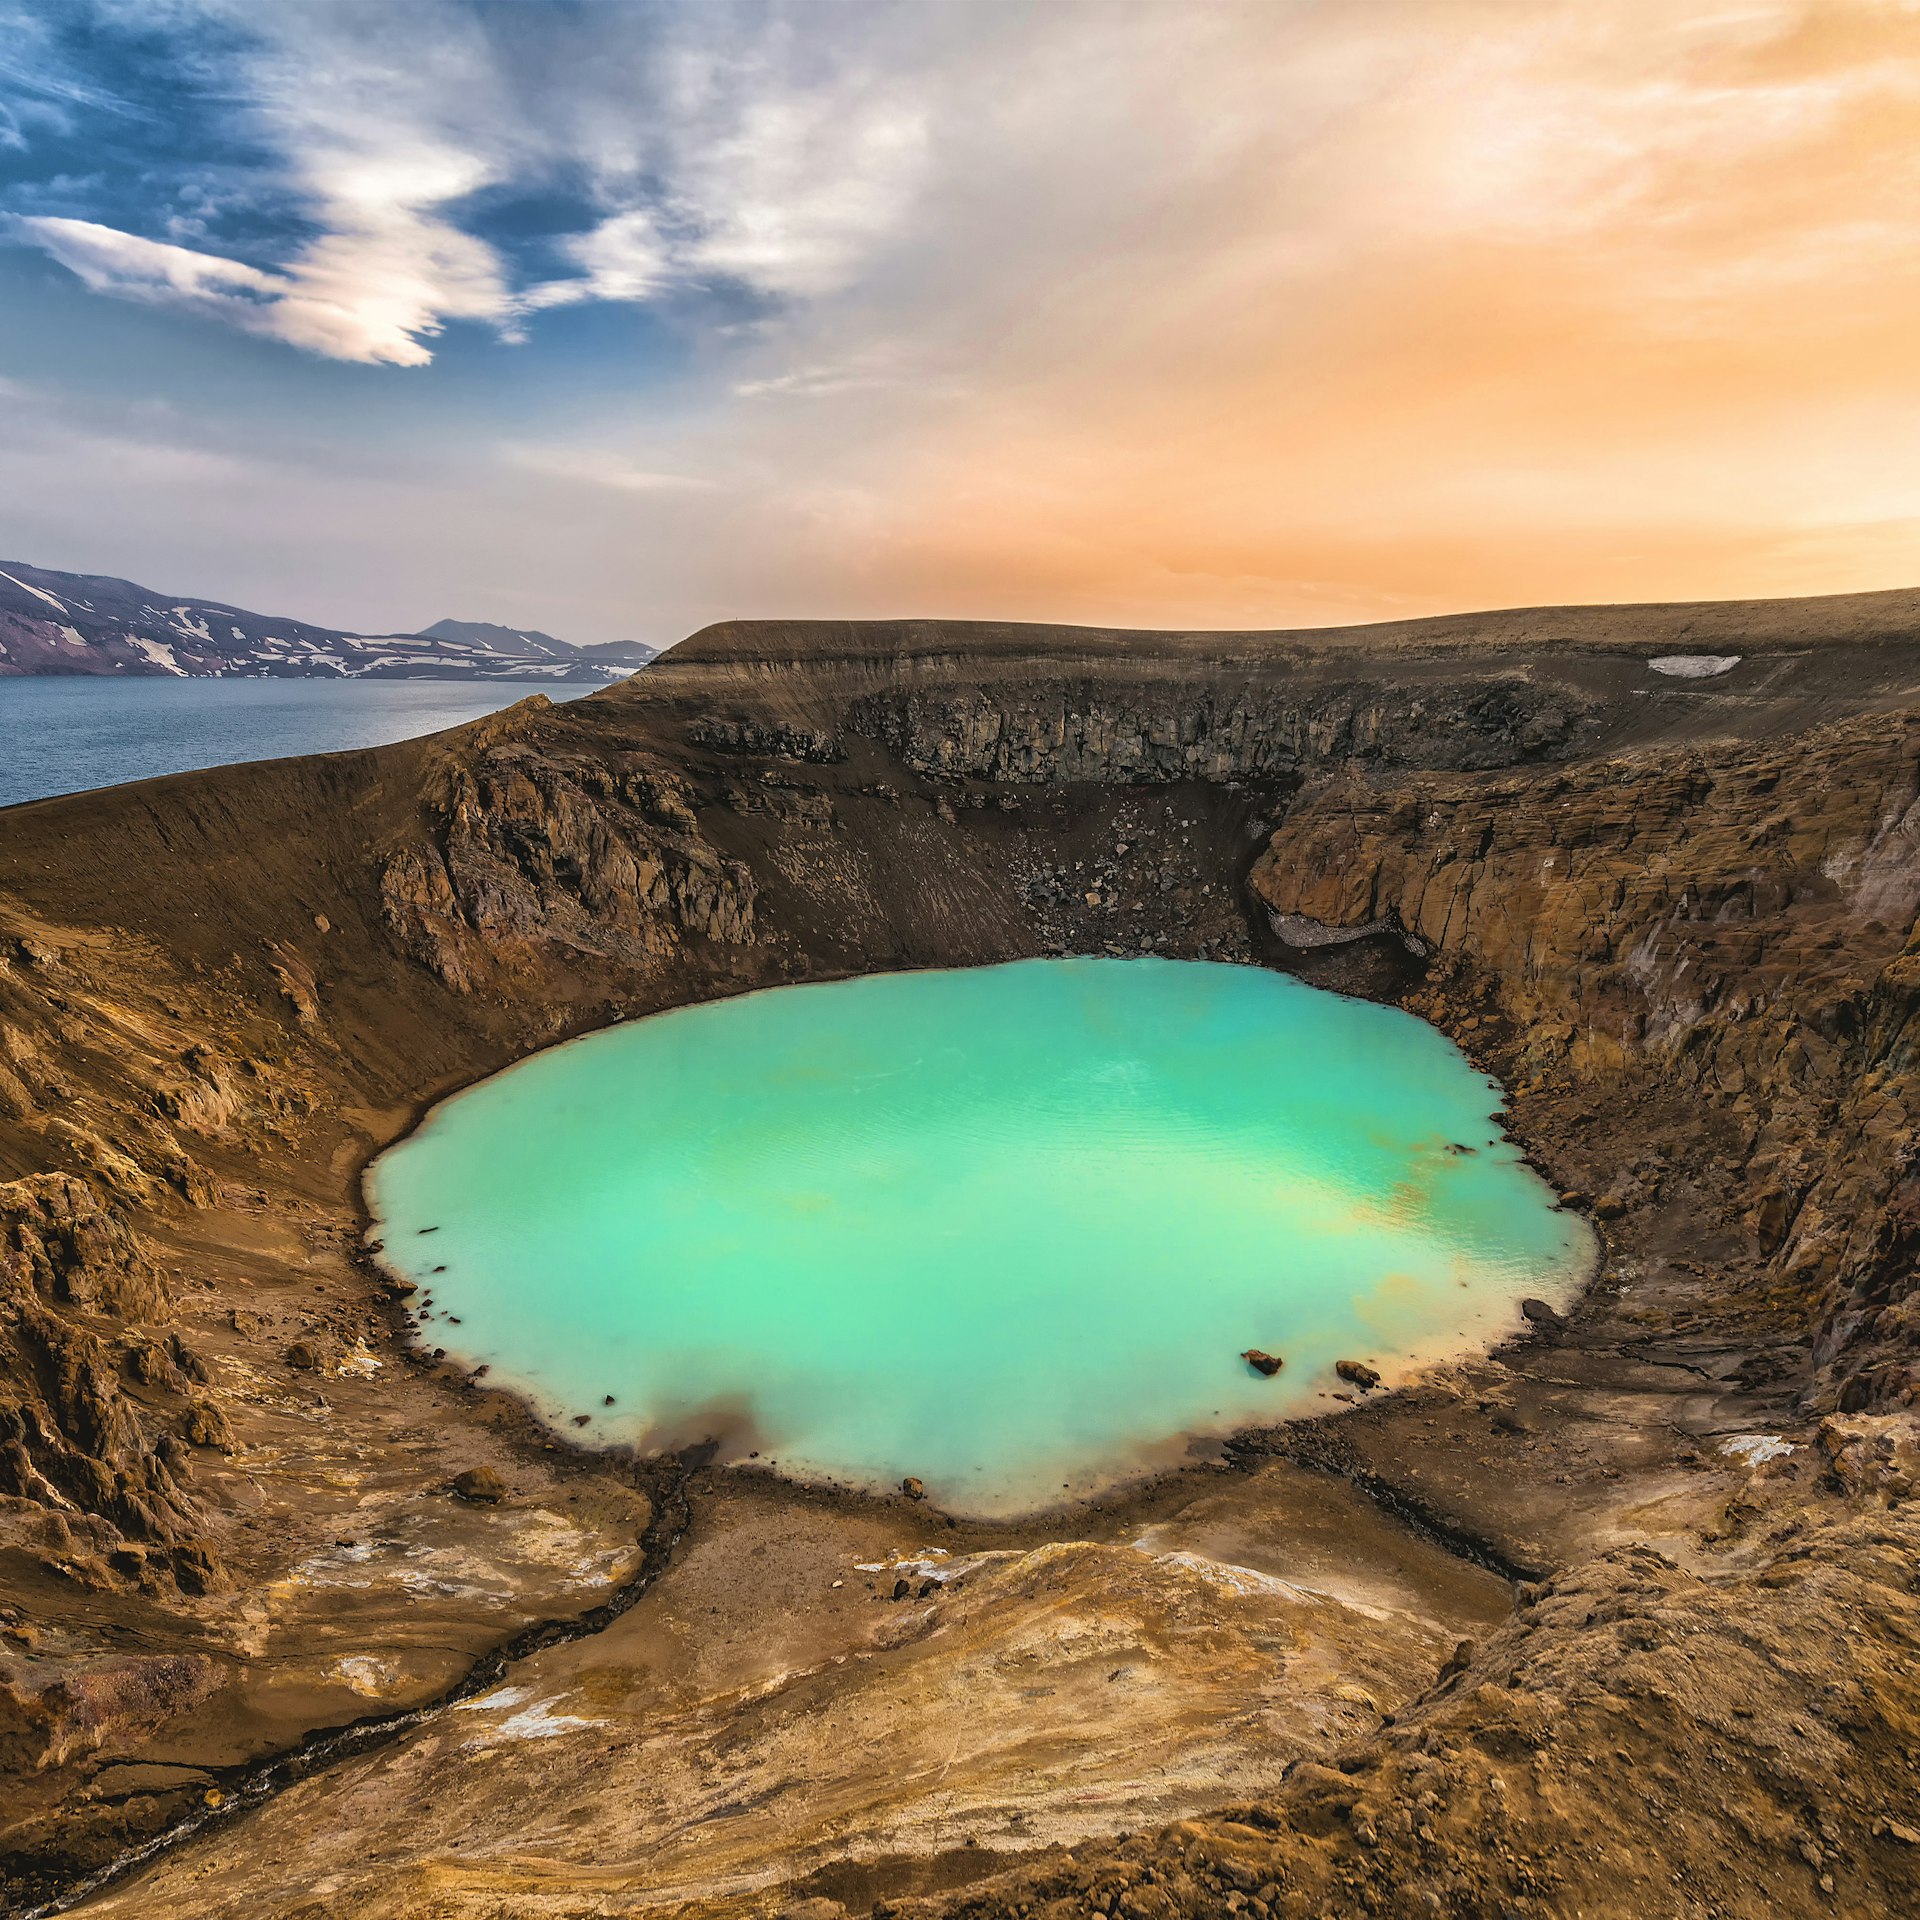 A crater filled with milky blue water with a clear blue lake in the background.